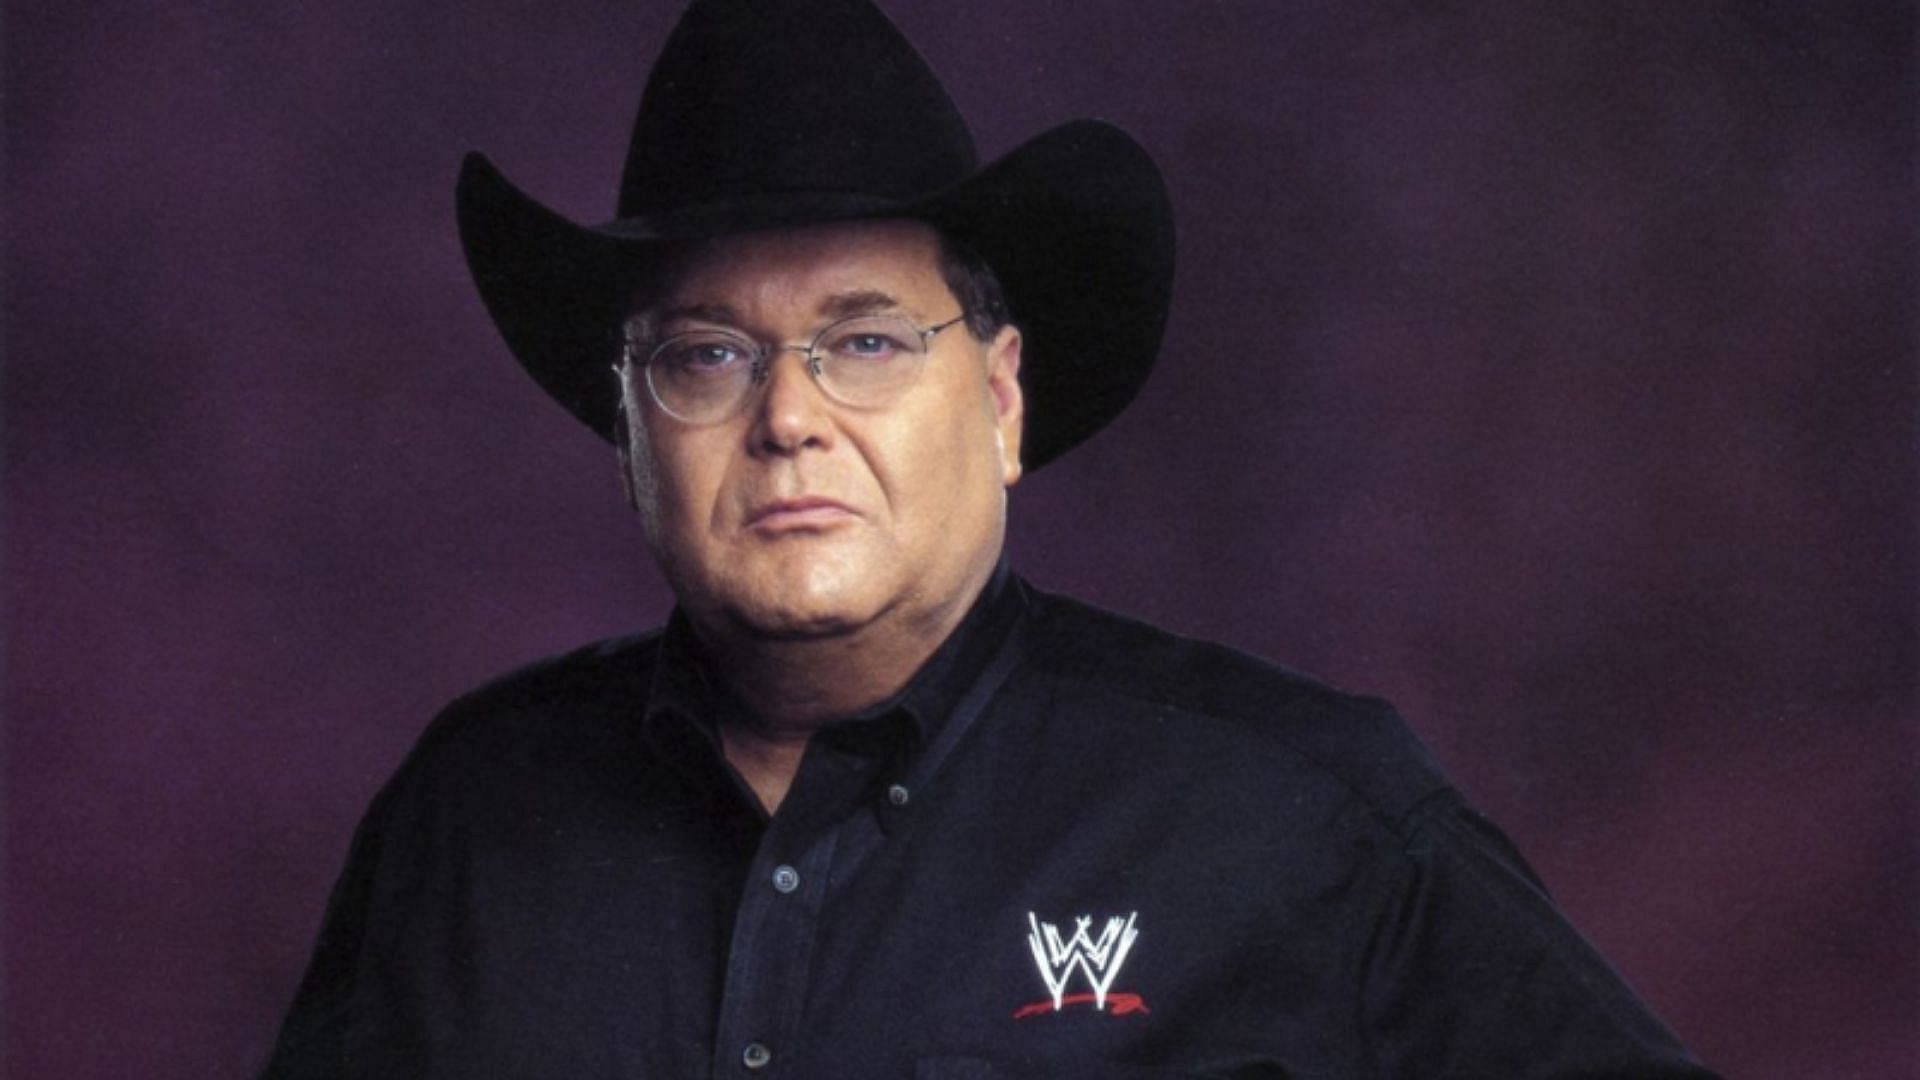 WWE Hall of Famer and former executive Jim Ross